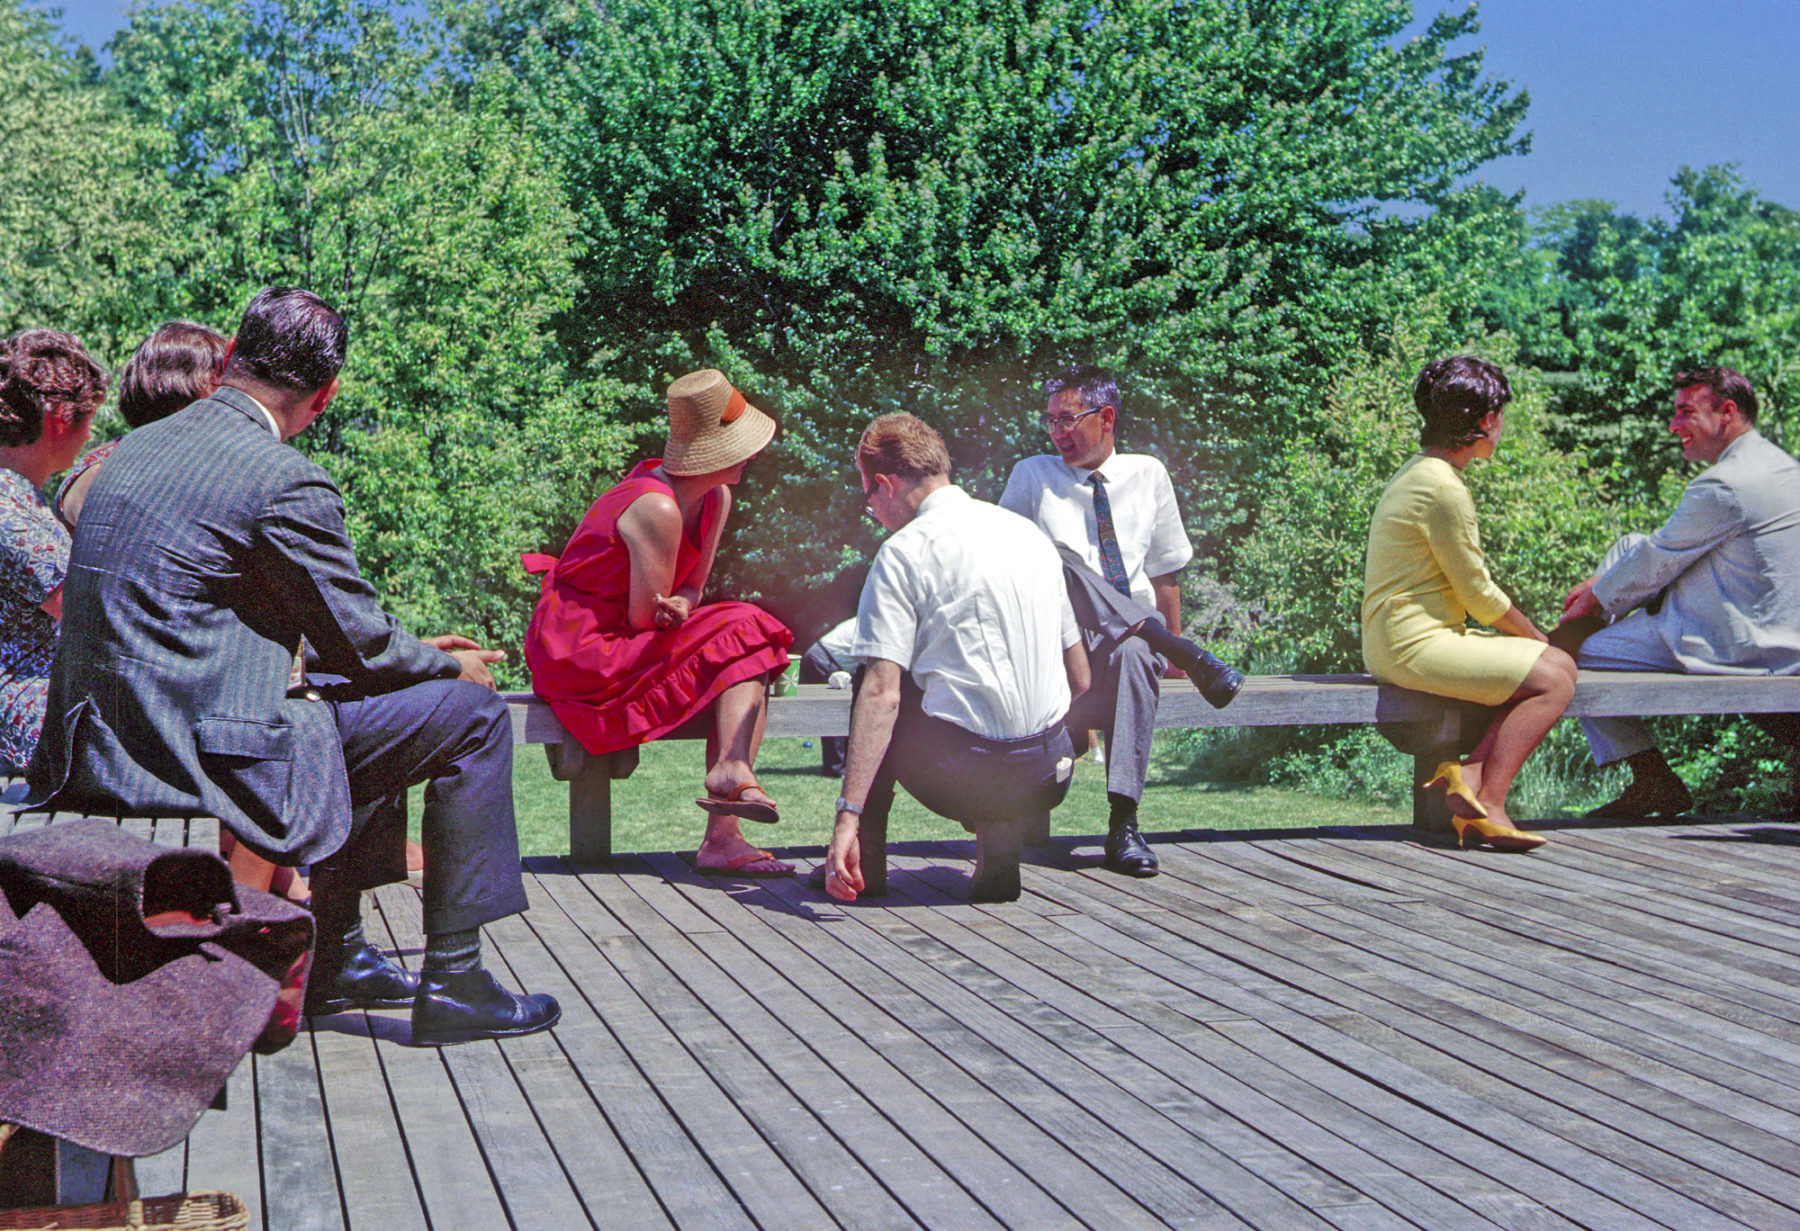 vintage photo of Hideo Sasaki sitting on deck at a party with people in brightly colored clothes